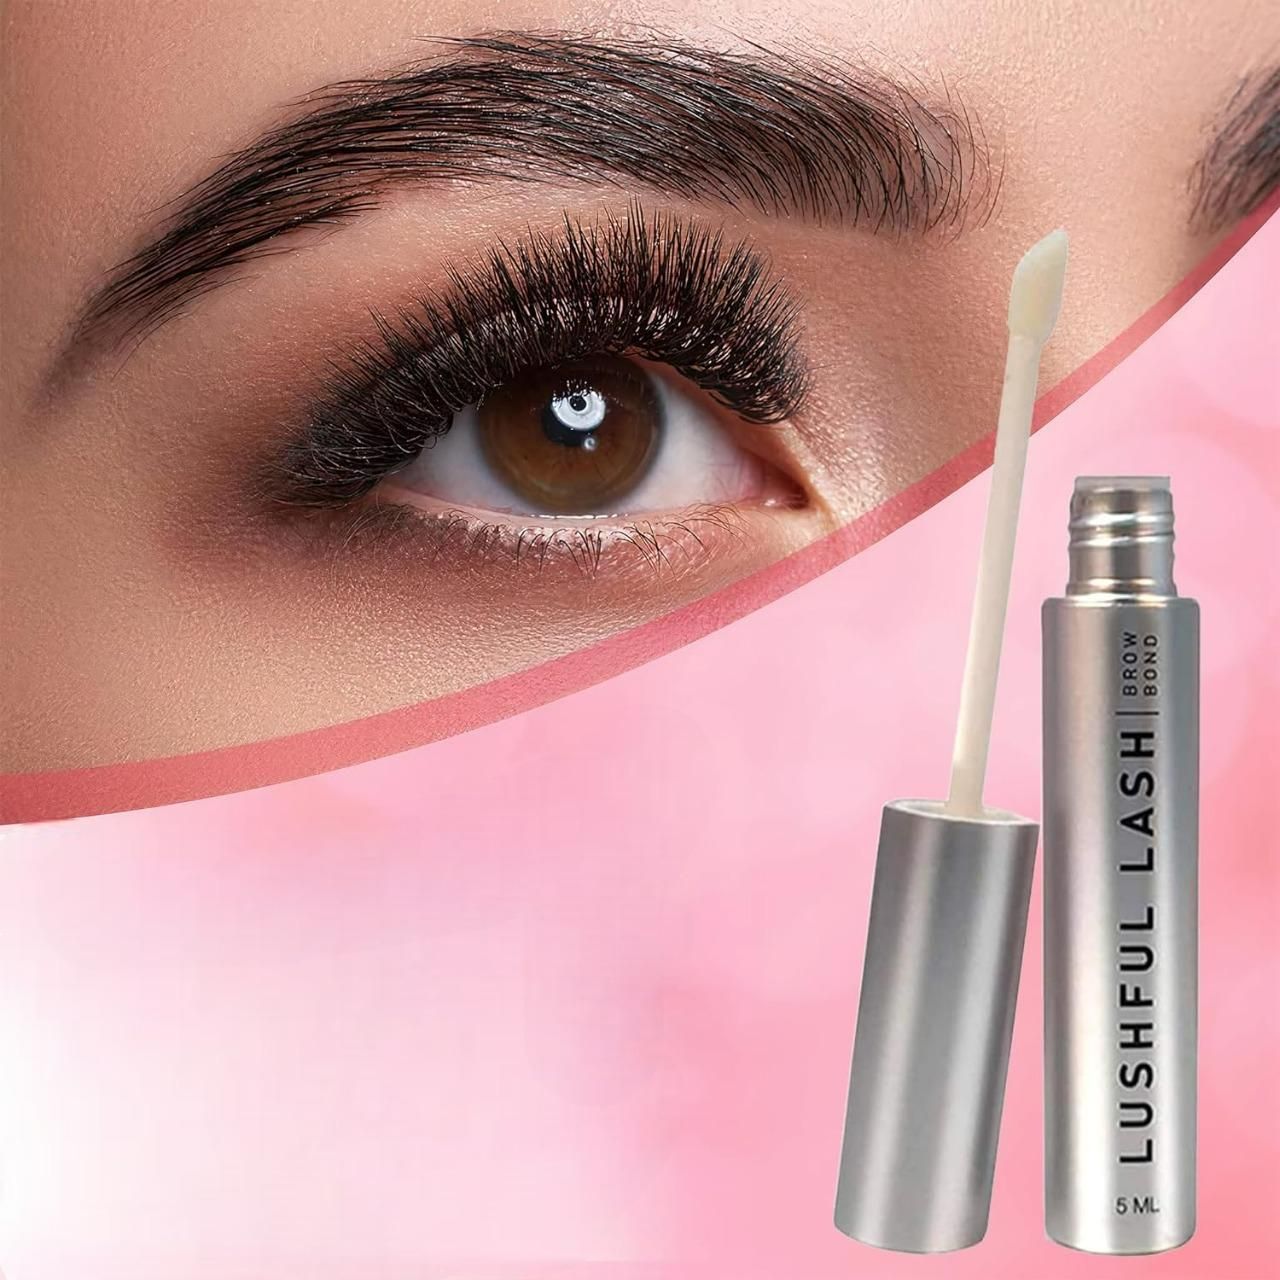 Lushful Lash Eyebrow Enhancement Growth Serum for Thicker and Fuller Brows Growth Serum (Pack of 1)